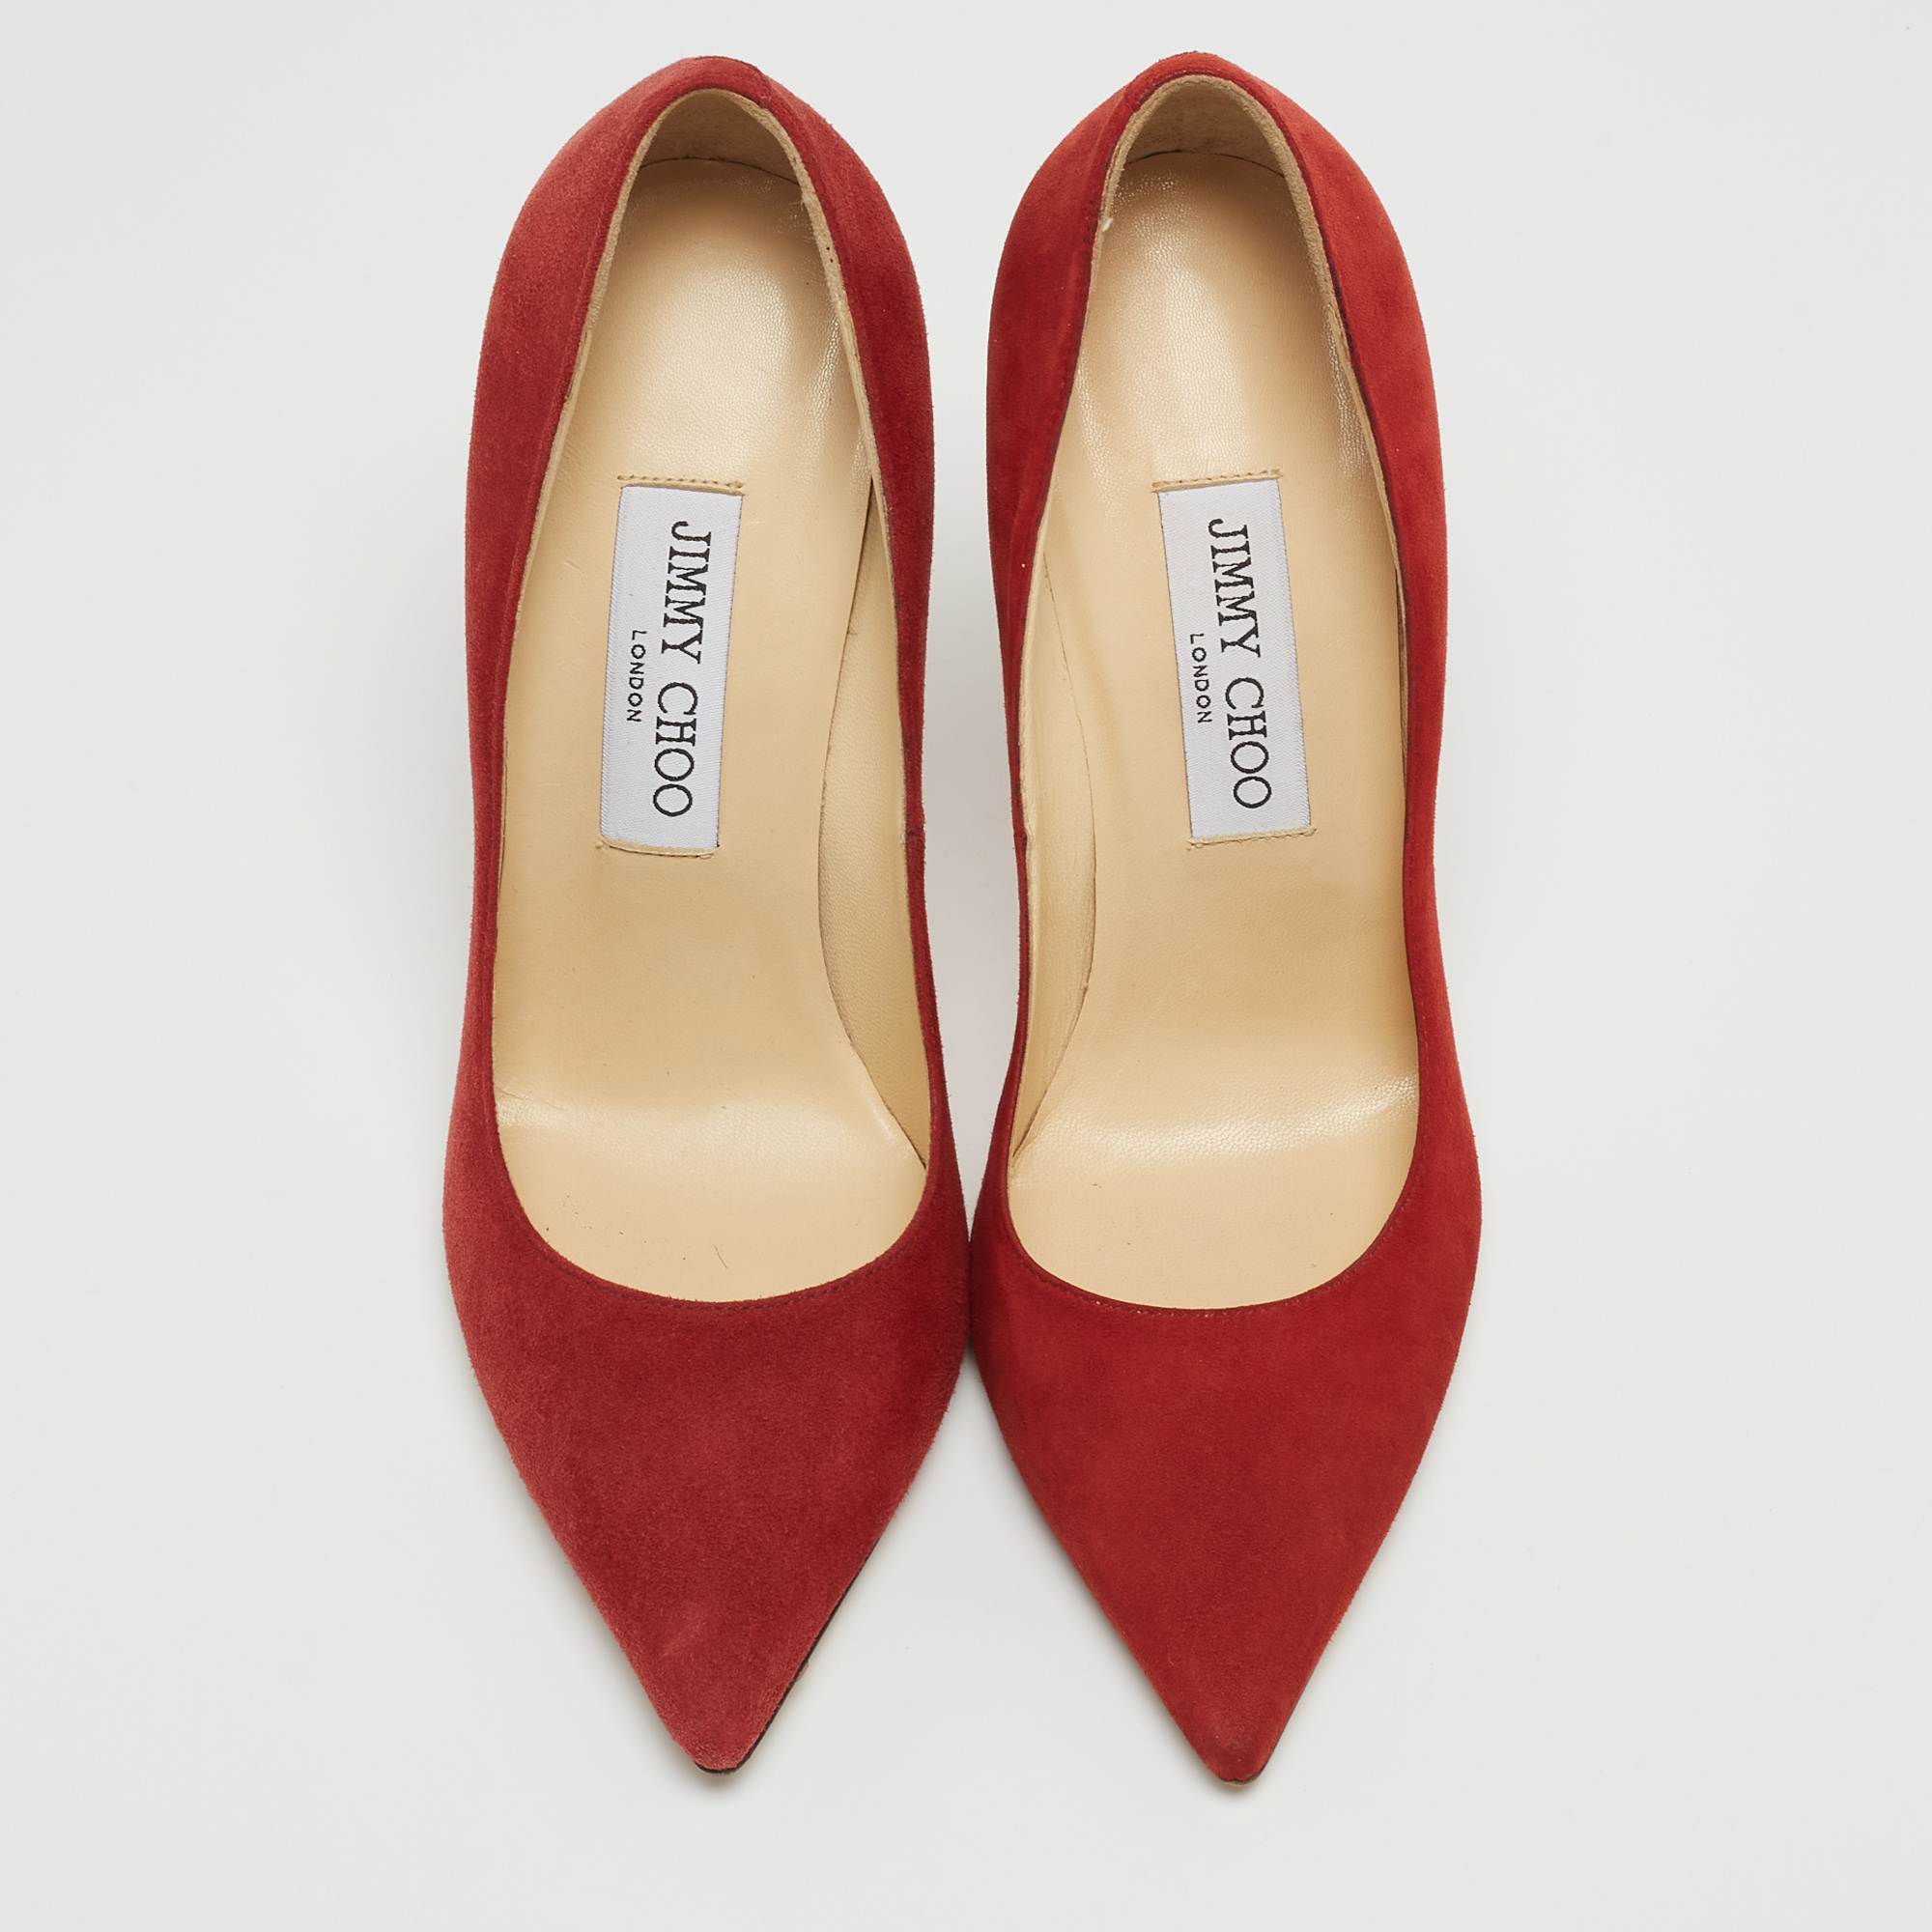 Jimmy Choo Red Suede Romy Pumps Size 37